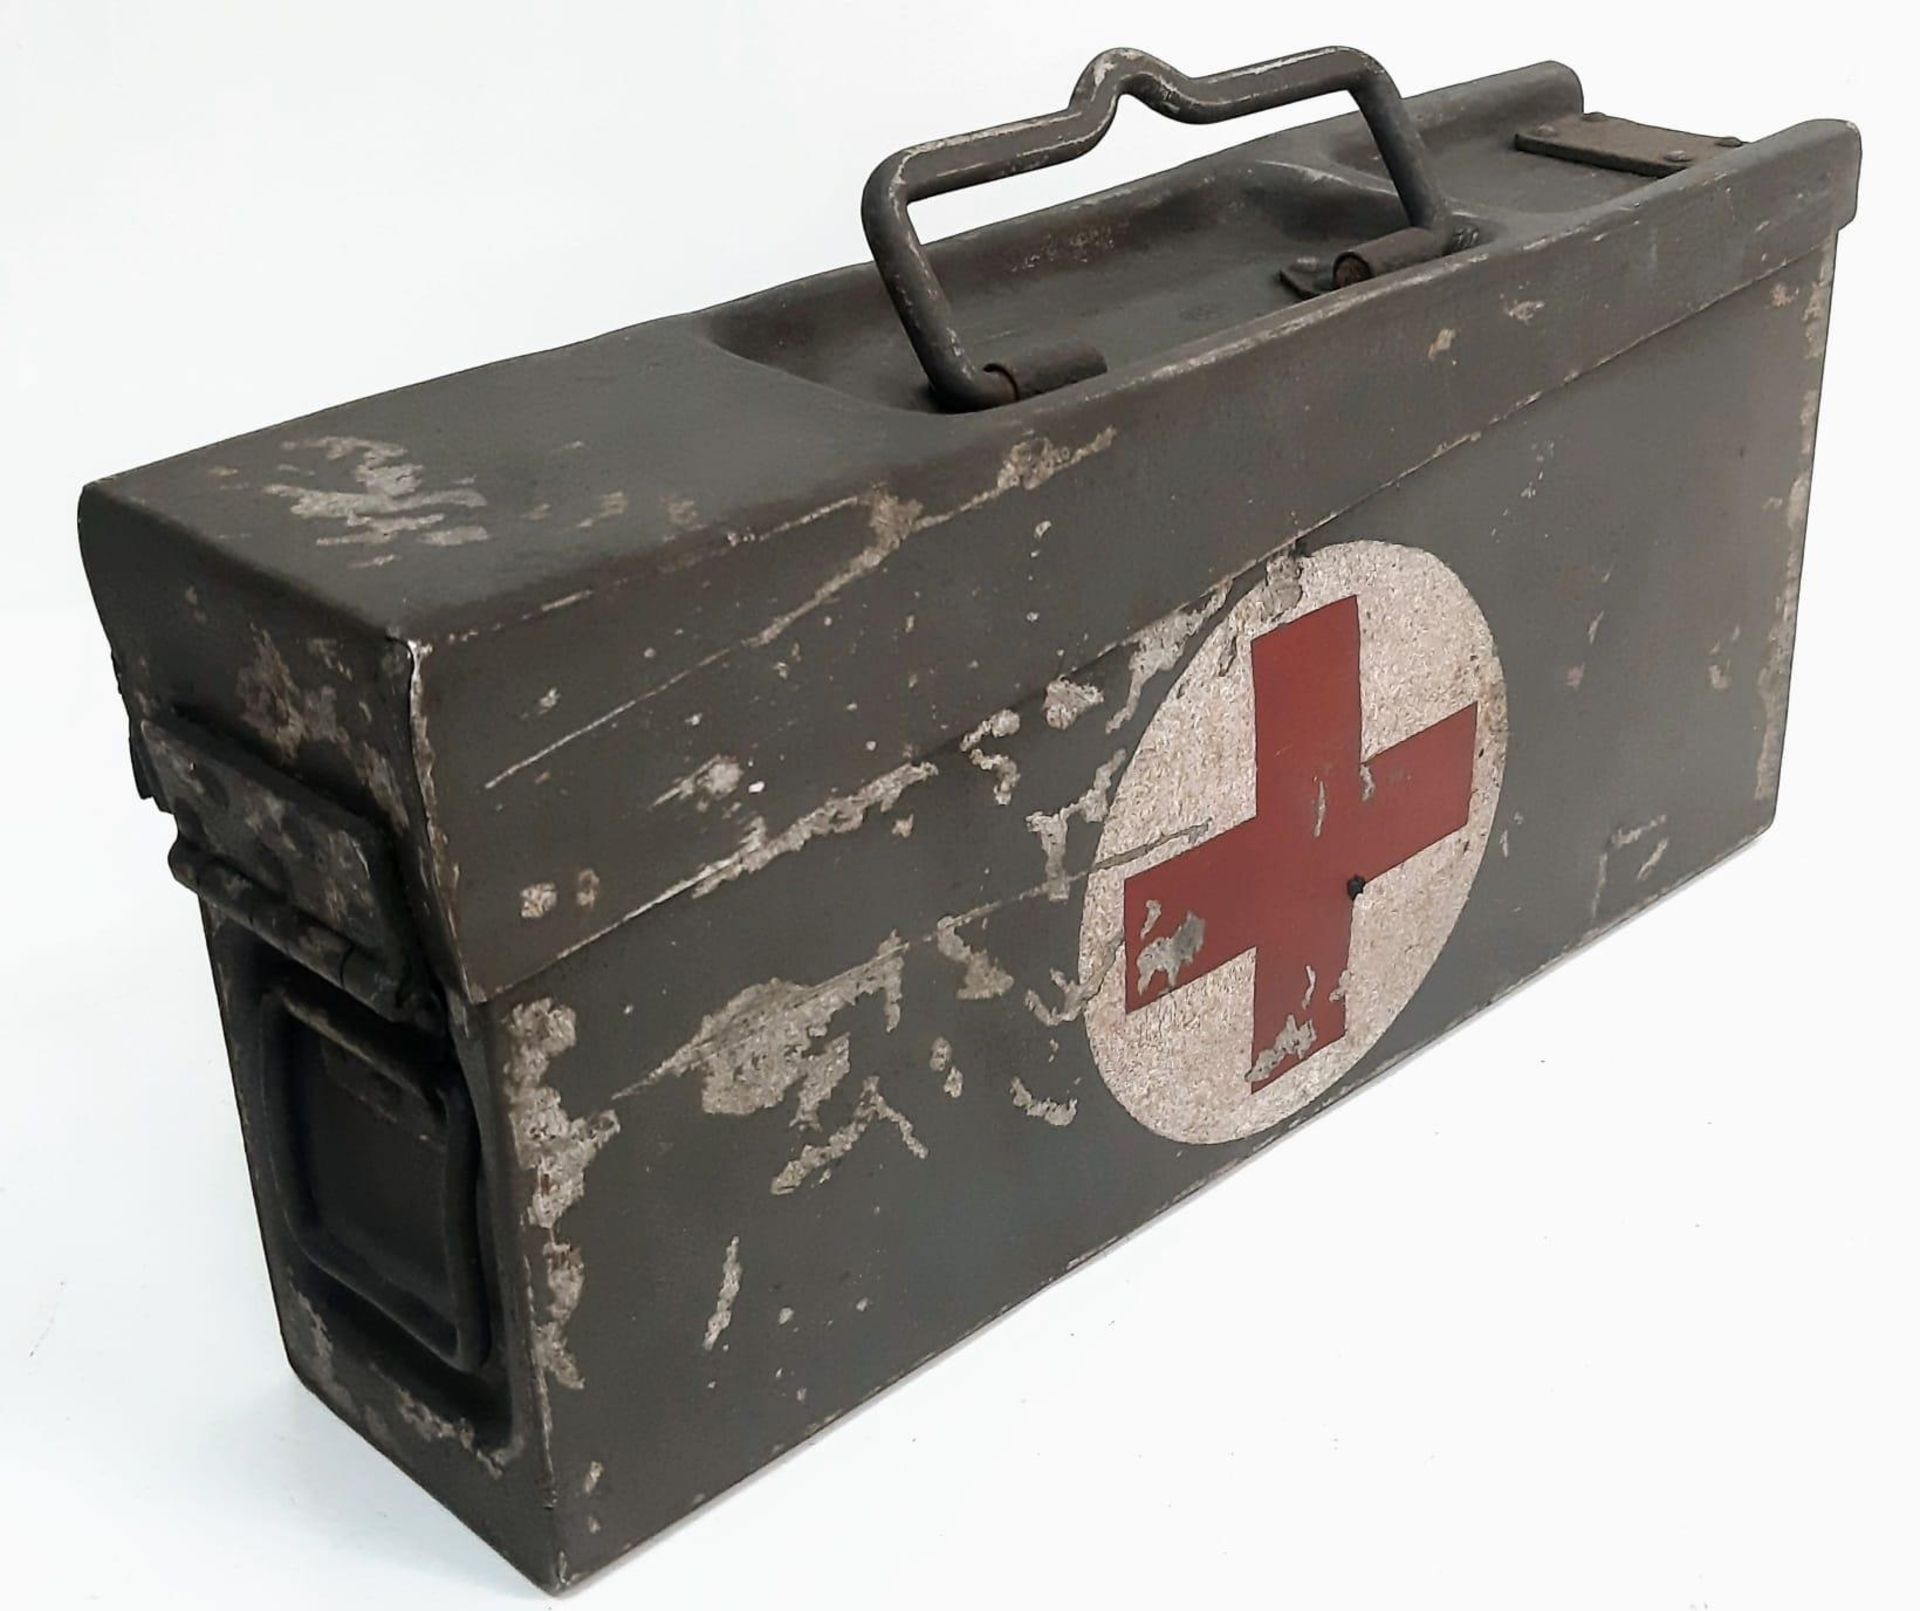 1941 Dated Aluminum MG Ammo Tin used as a First Aid Box. The lightweight tins were favoured by the